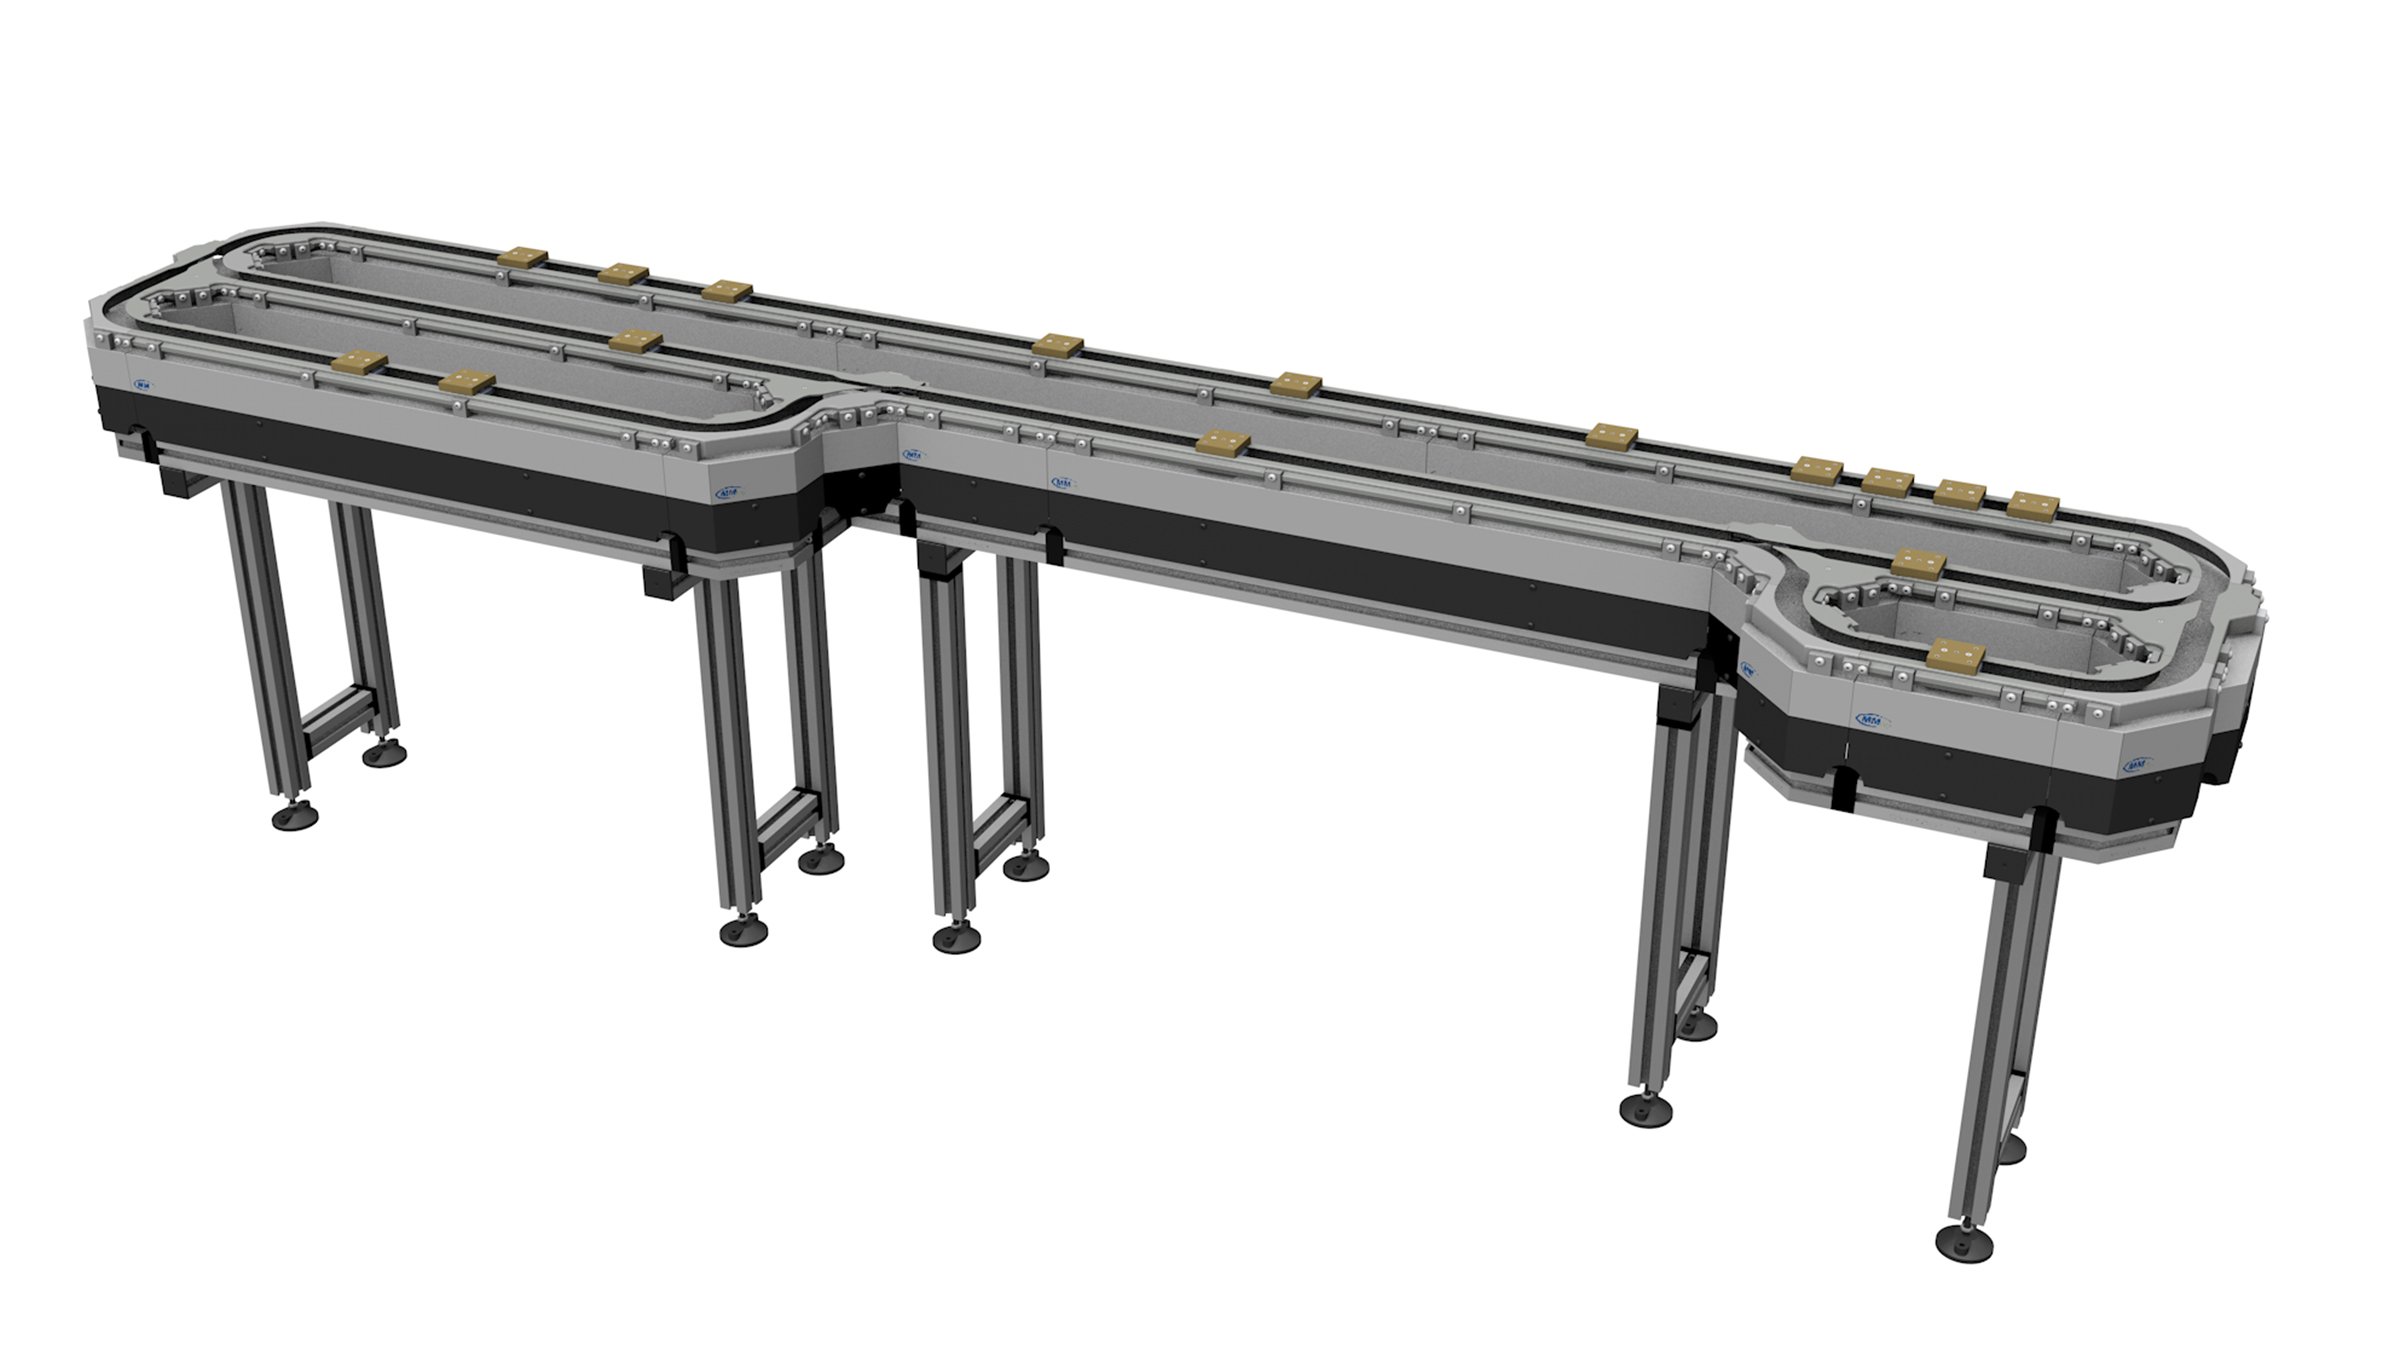 An isometric view of a grey MagneMover LITE Intelligent Track System layout with carriers in motion throughout the track standing on mounting legs.